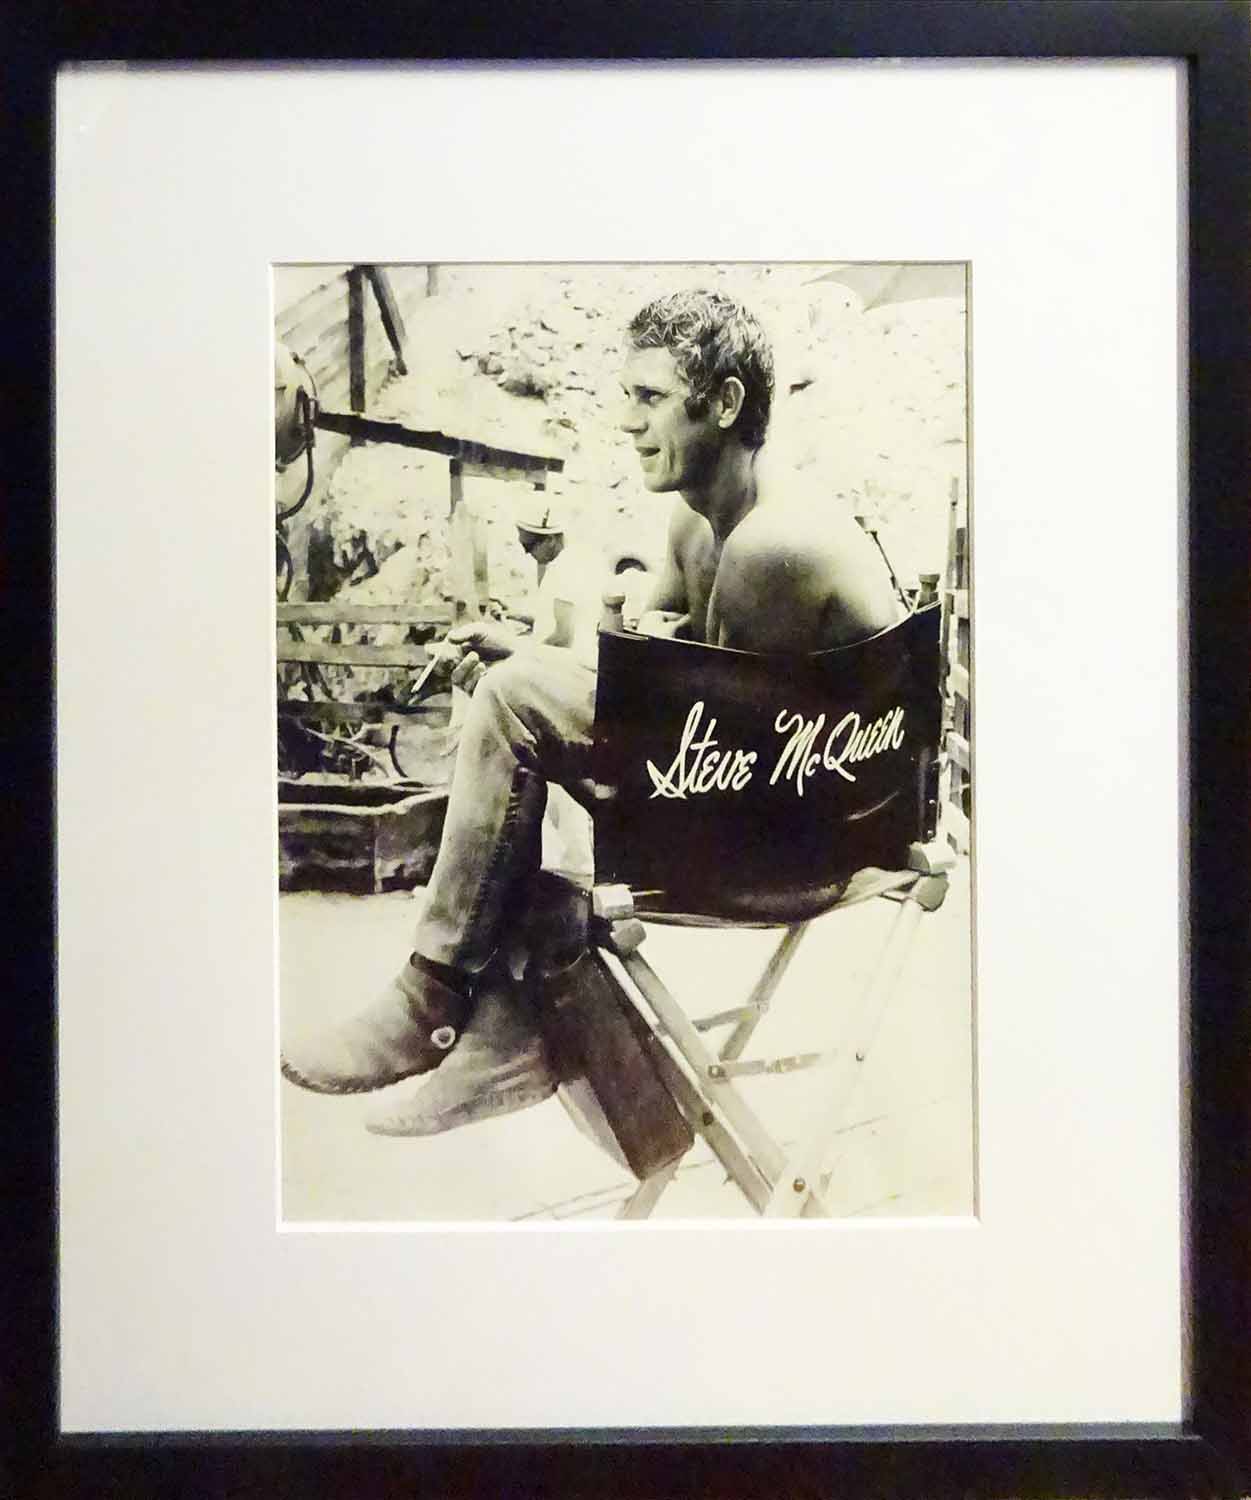 'STEVE McQUEEN smoking a cigarette on set', b/w photograph, limited edition 4/300,